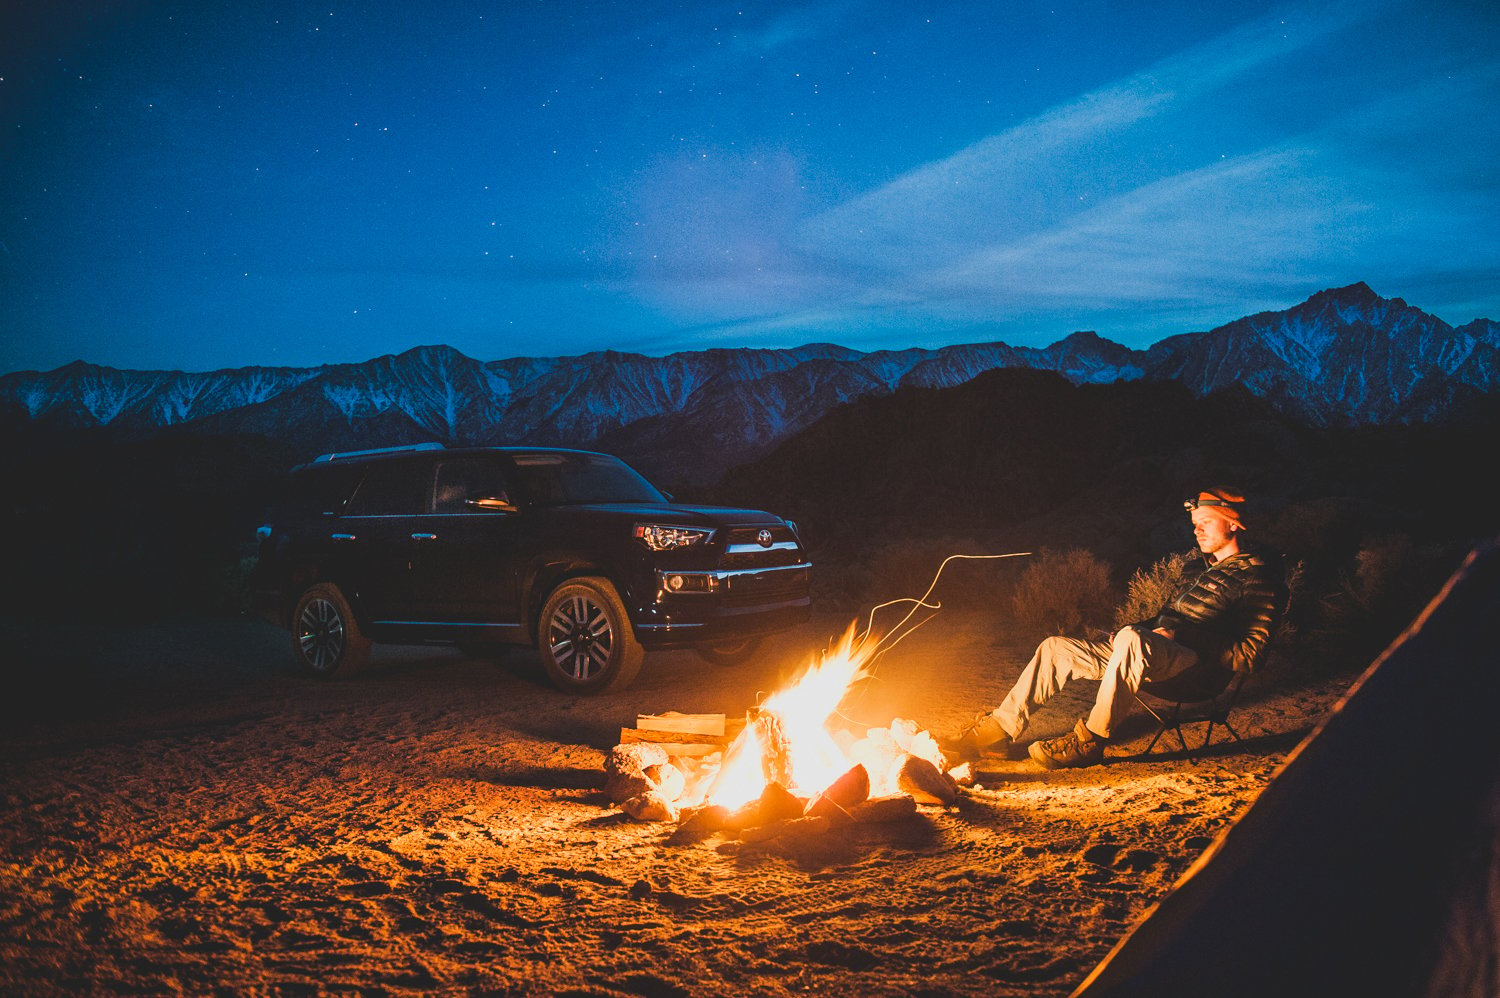 Toyota 4Runner and a camper pictured next to a cozy fire in a mountainous region, photo by Mark Skovorodko.